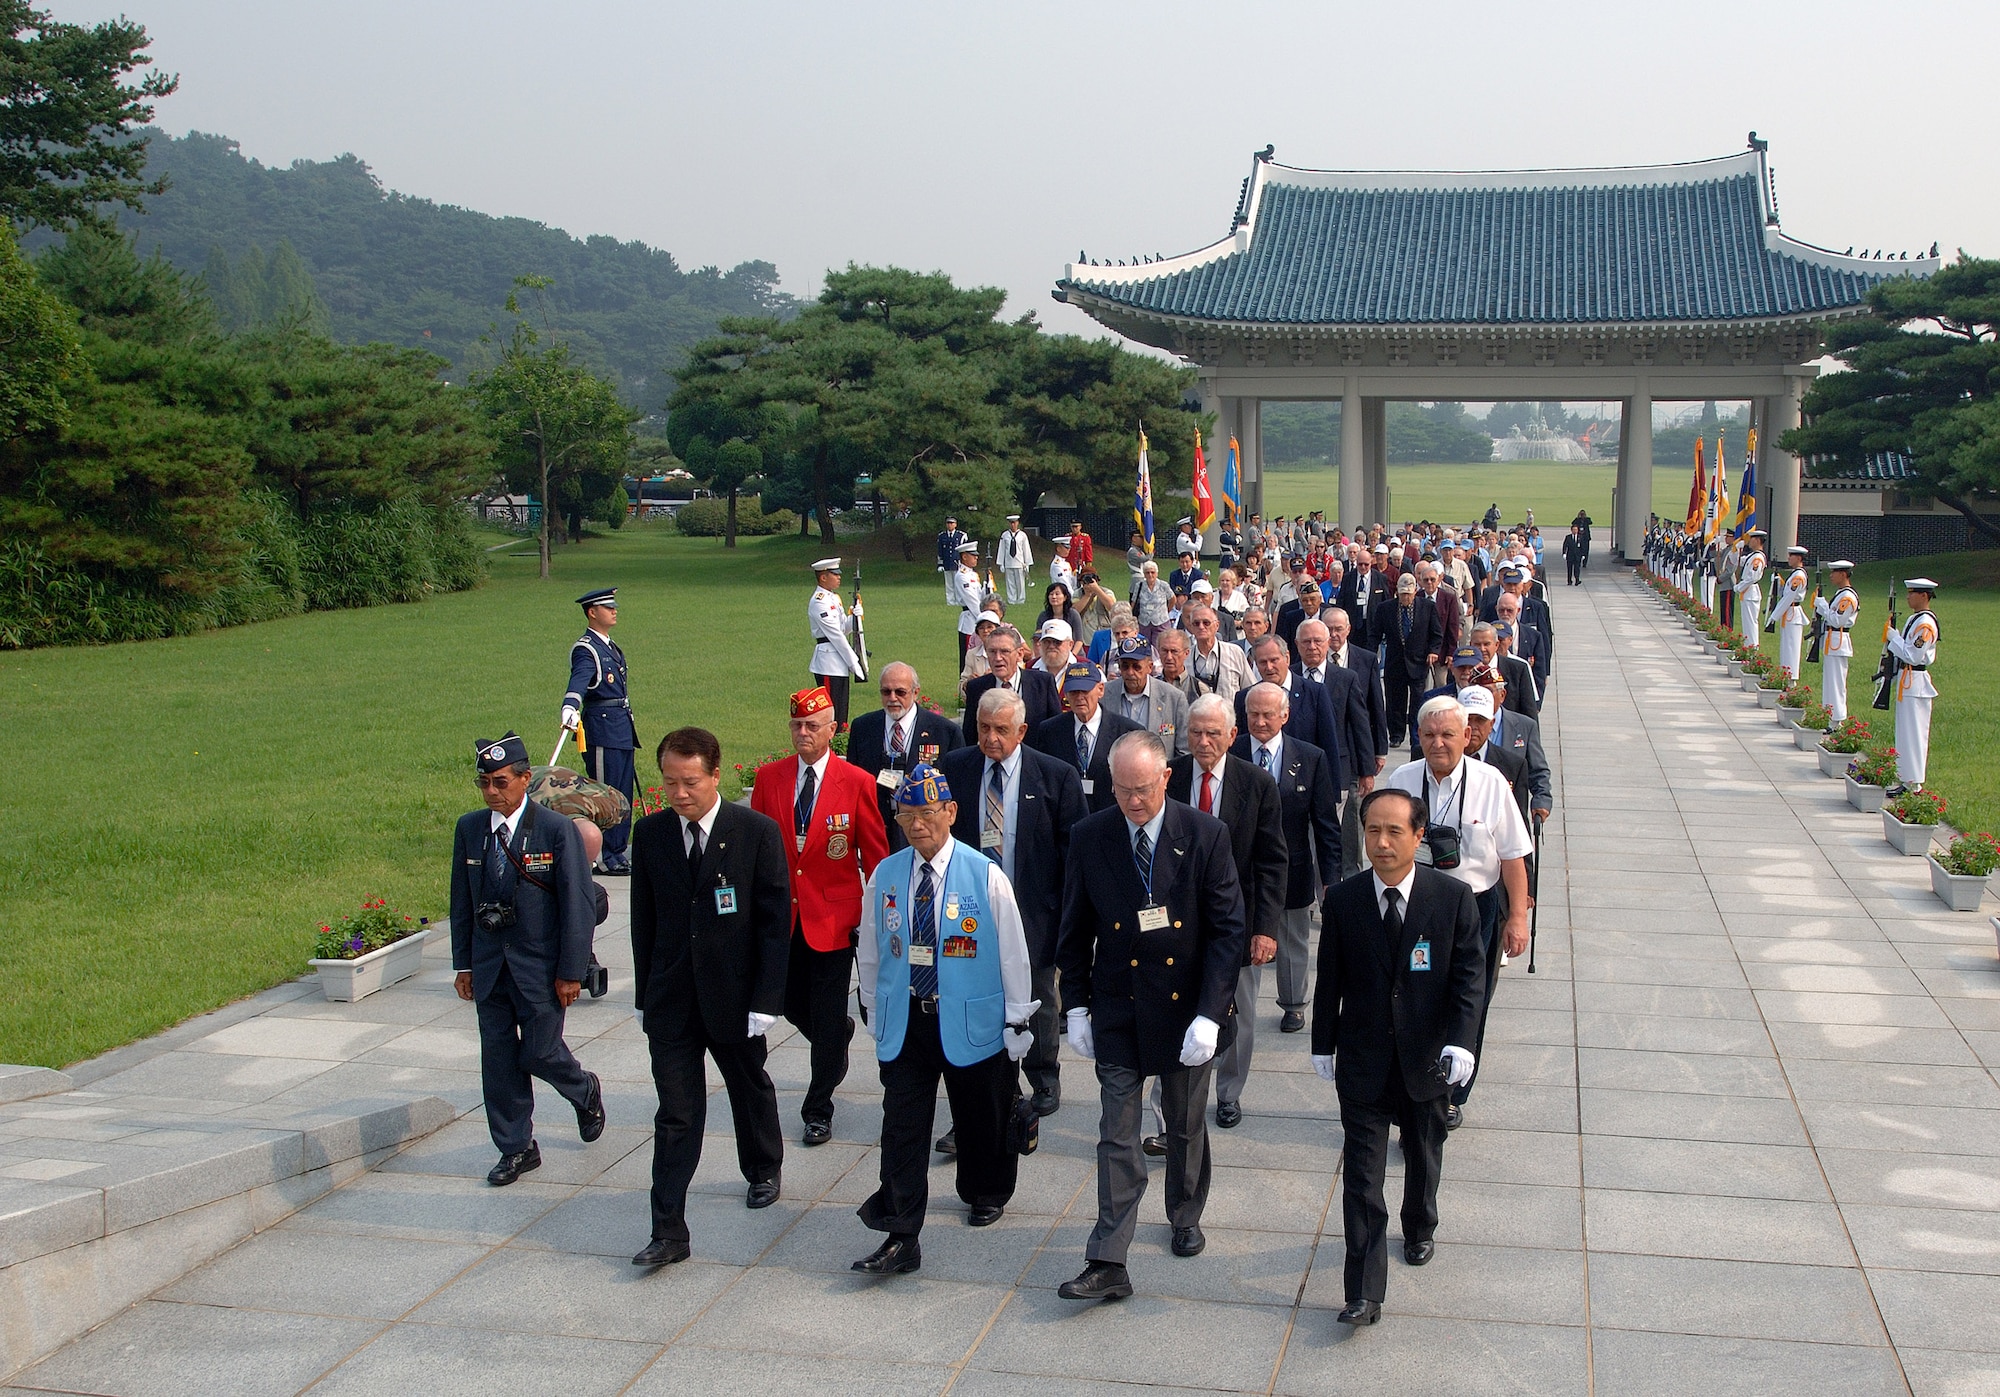 Retired Maj. Gen. Carl G. Schneider and retired Philippines Gen. Vic Azada lead more than 200 Korean War veterans for a wreath-laying ceremony at the South Korean National Cemetery along with fellow Korean War veterans Sept. 12. The South Korean government's Revisit Korea program invites war veterans each year to come to South Korea to honor the men and woman from 21 countries who served during the Korean War. Nearly 25,000 veterans have participated in this program since 1975. (U.S. Air Force photo/Staff Sgt. Bennie J. Davis III) 
